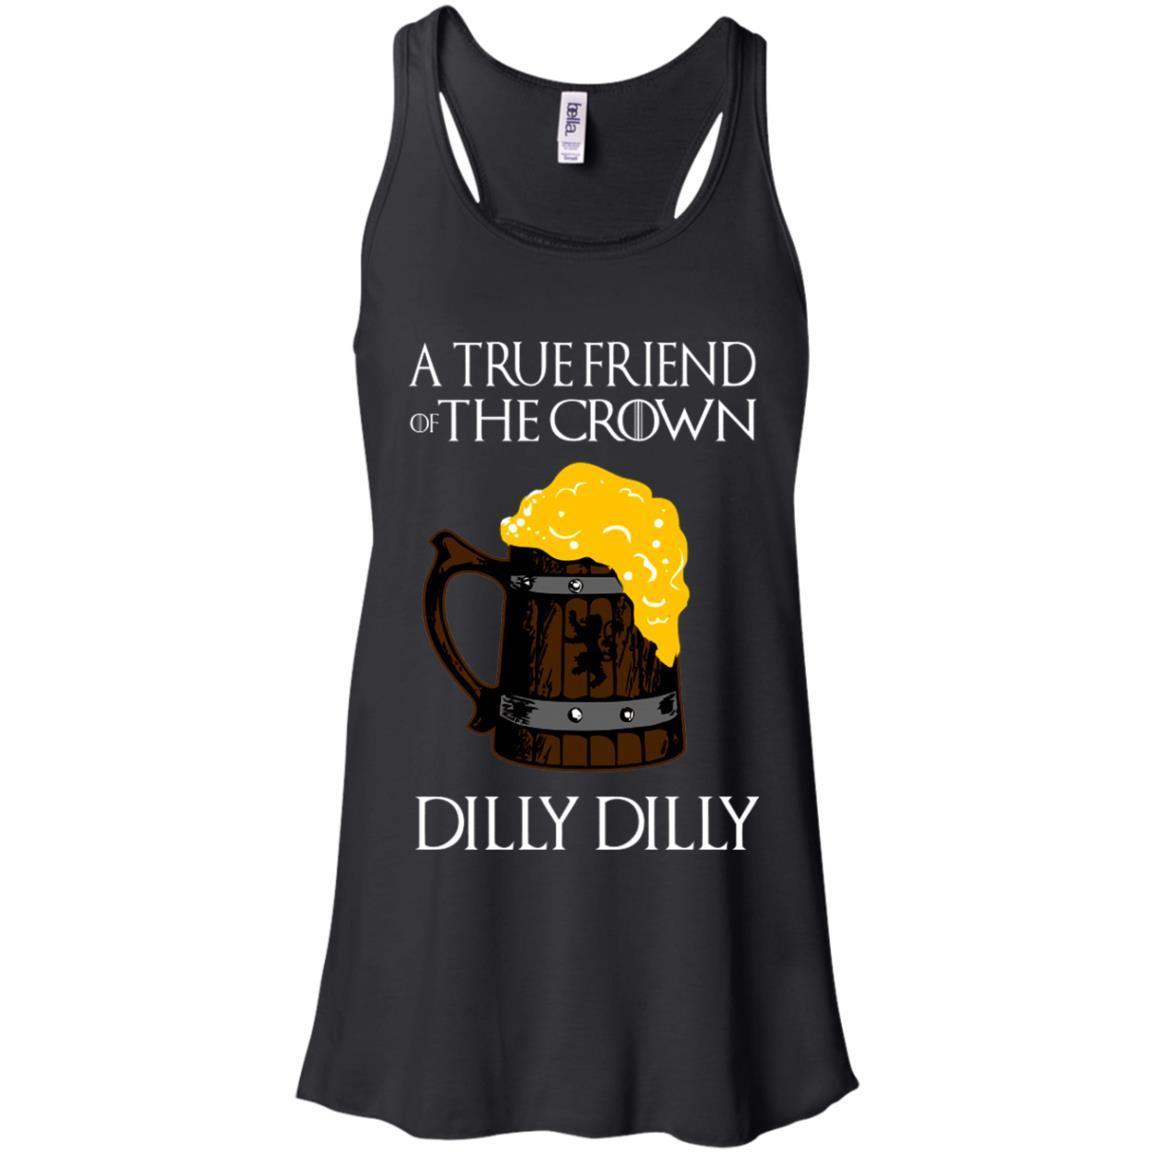 Bud Light Dilly Dilly! A True Friend Of The Crown Beer Lover Racerback Tank Shirts